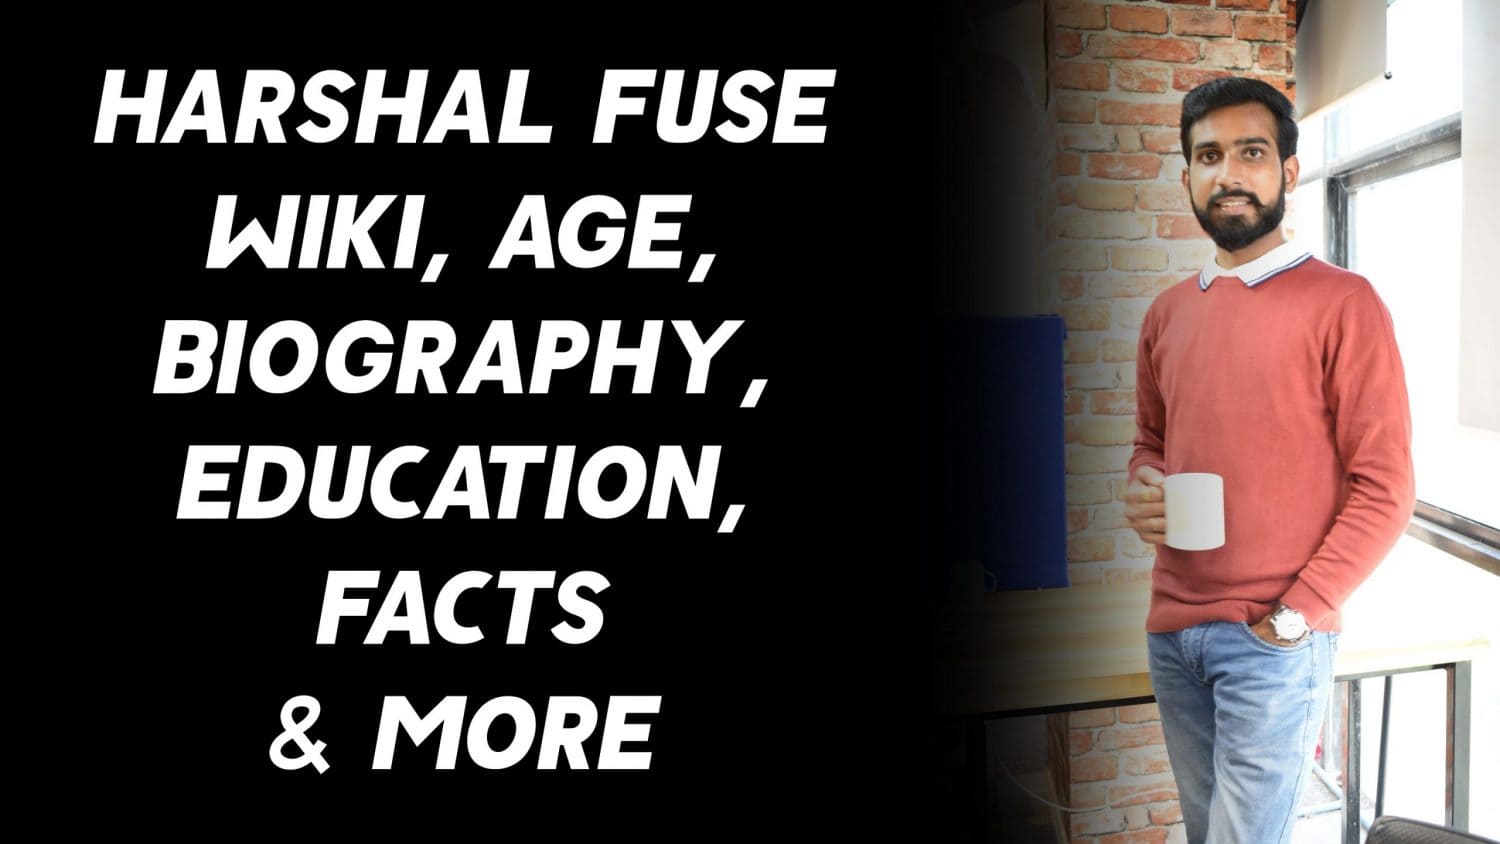 Harshal Fuse Wiki, Age, Biography, Education, Facts & More 1